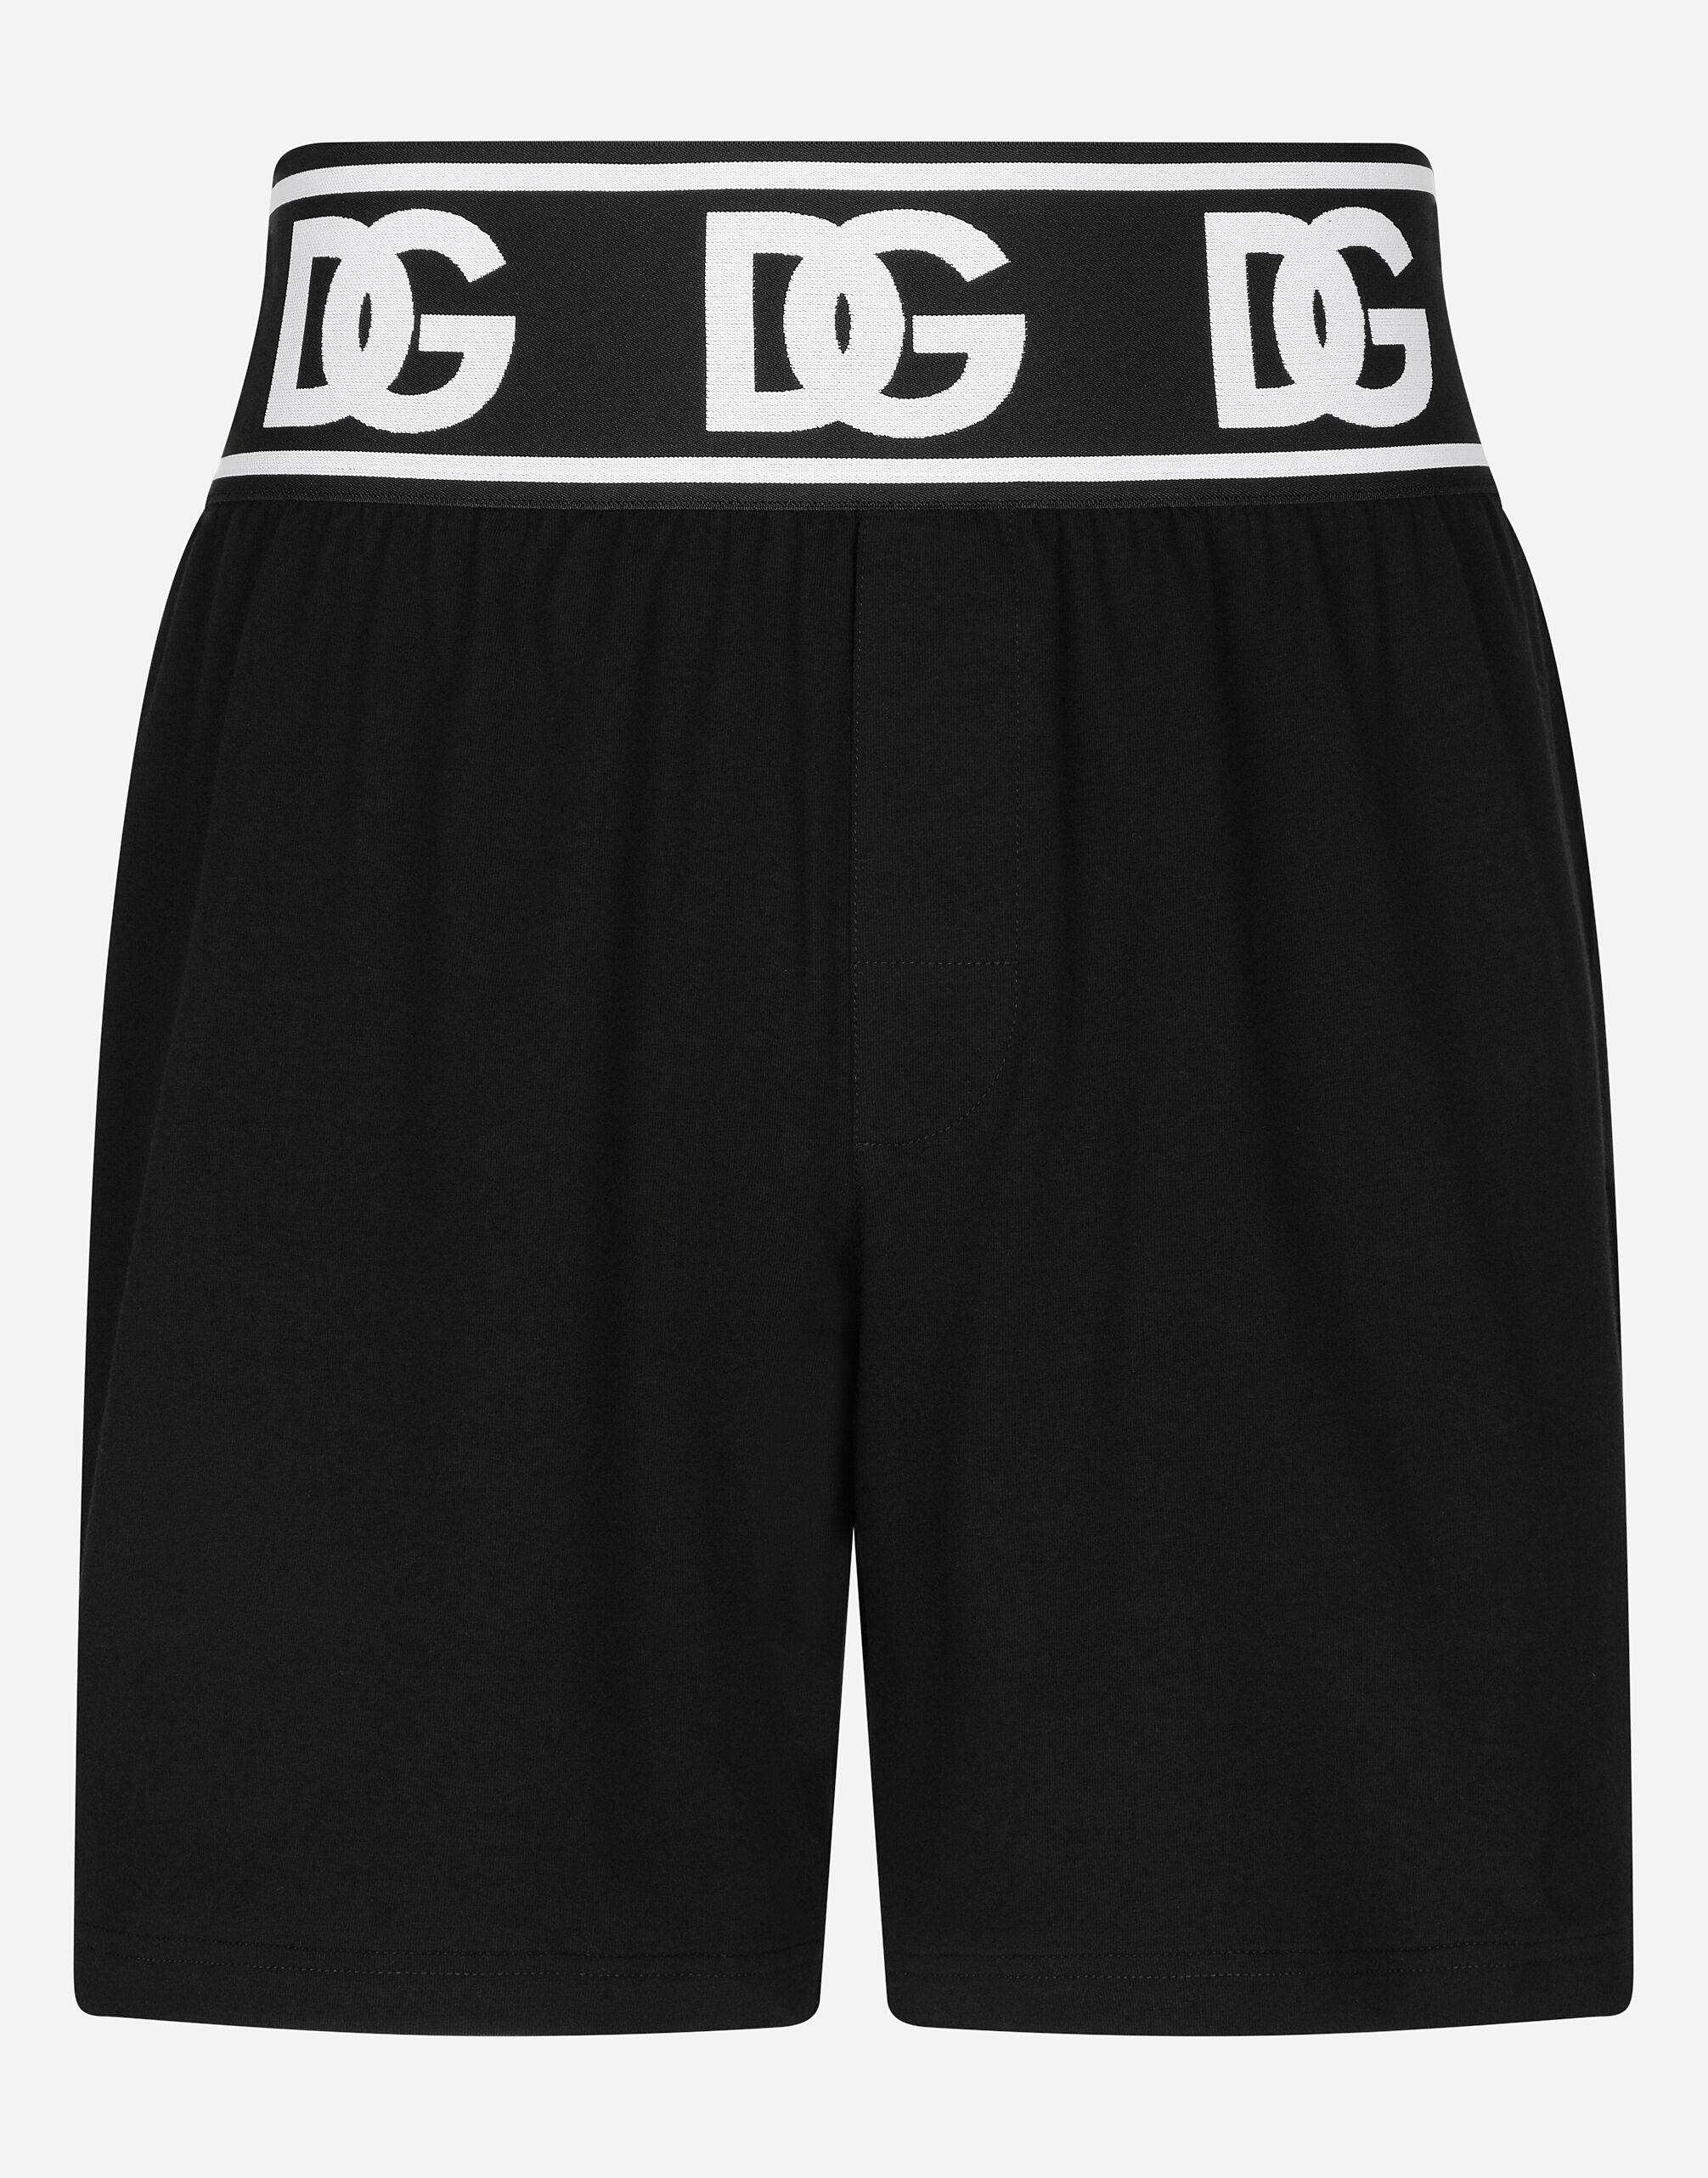 Dolce & Gabbana Two-way Stretch Cotton Shorts With Dg Logo in